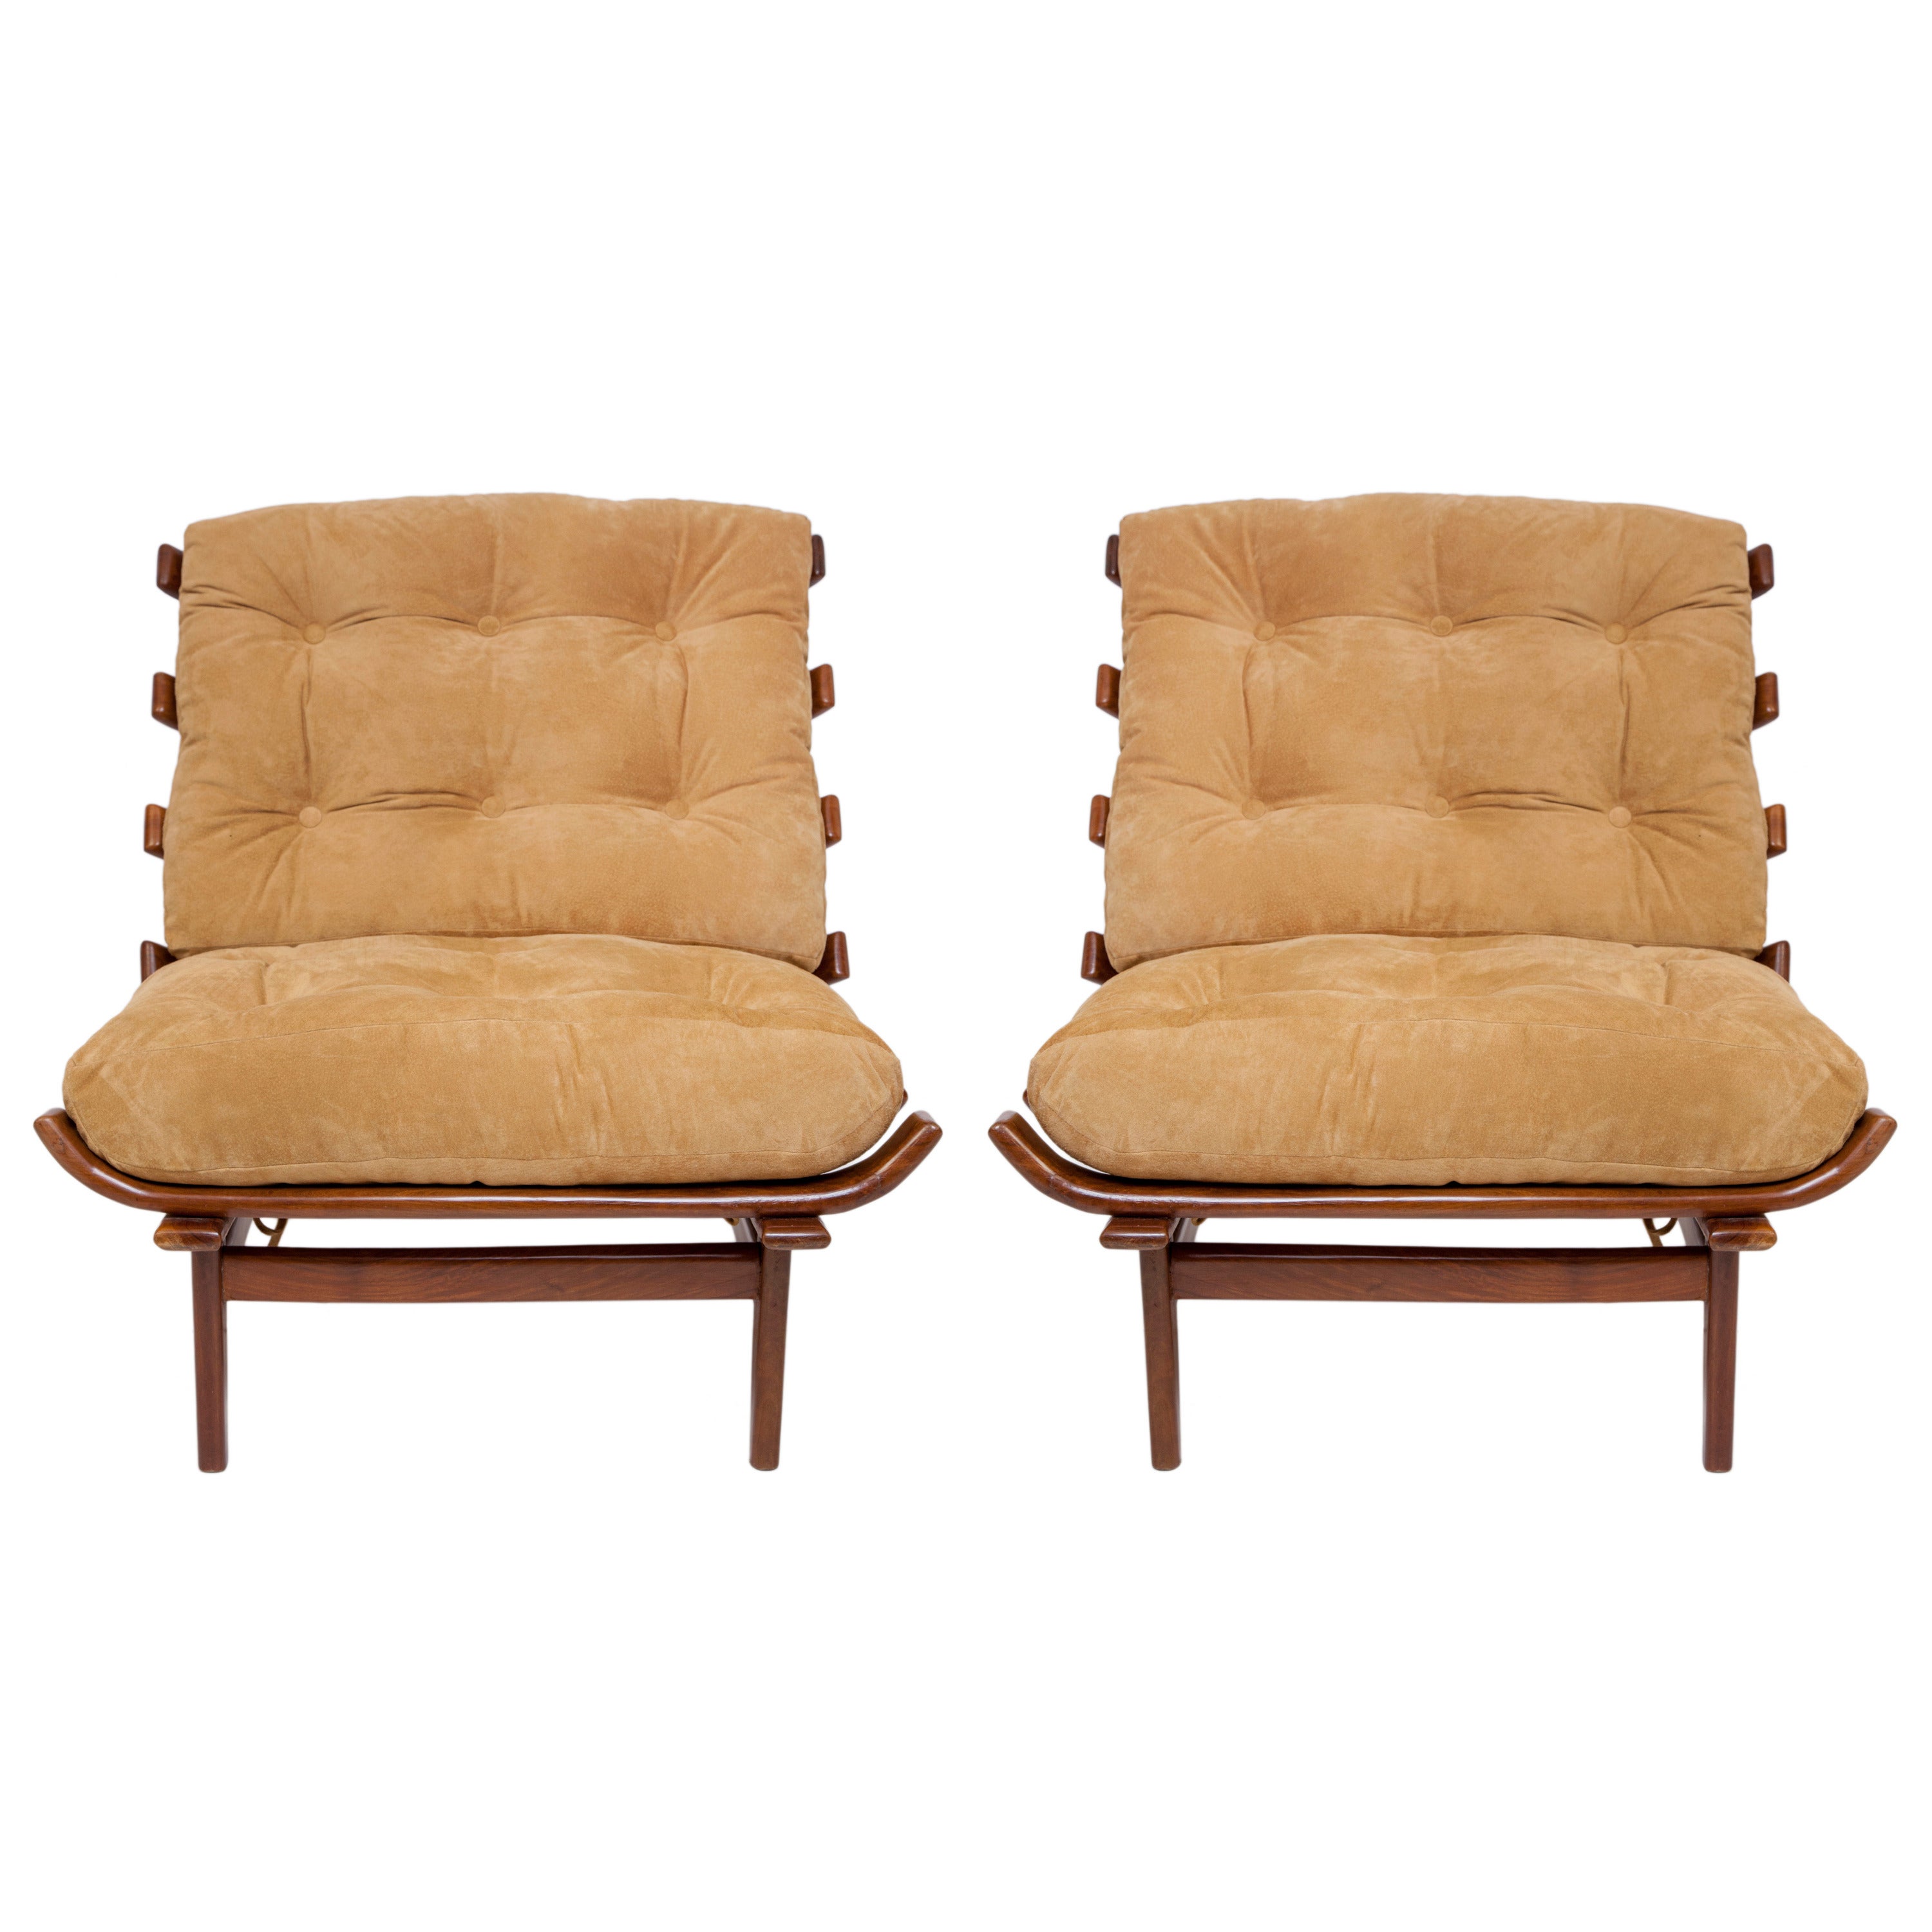 Pair of Rib Chairs in Brazilian Imbuia & Suede, Attributed to Martin Eisler